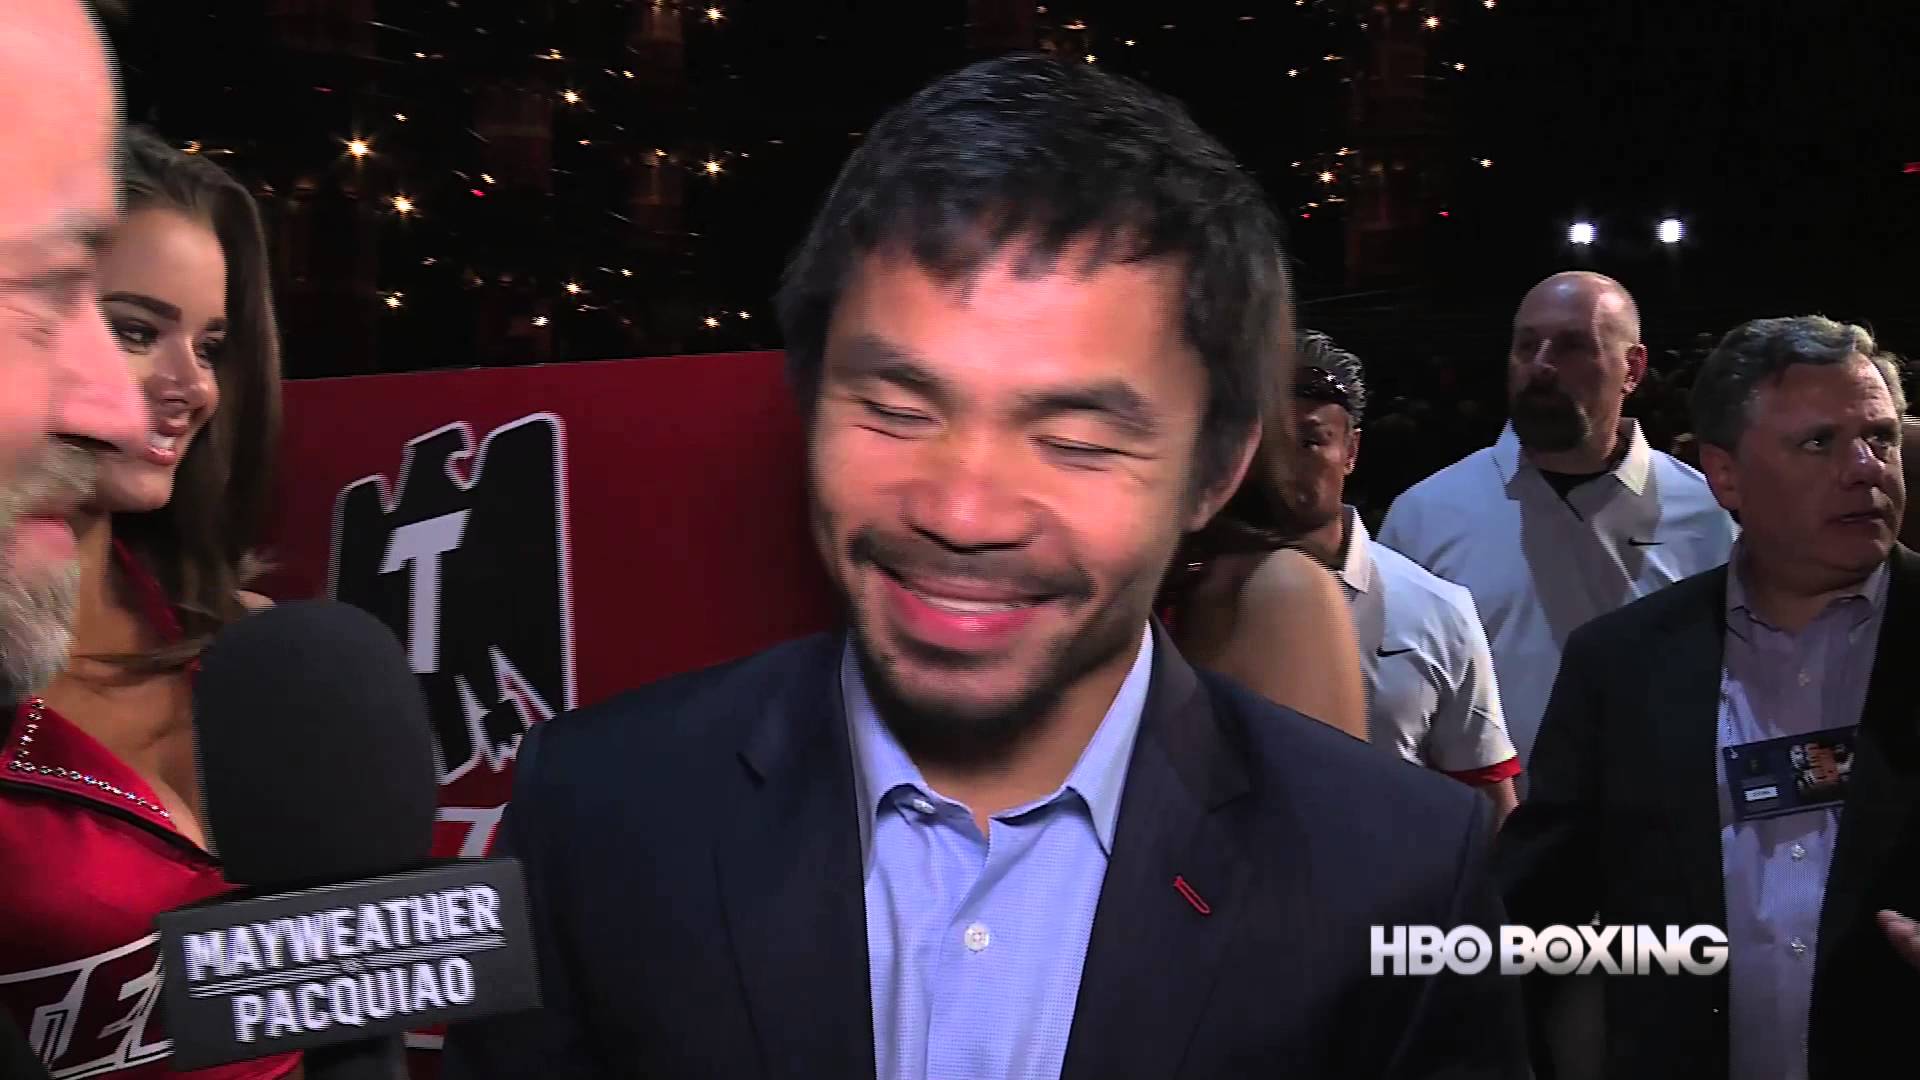 Manny Pacquiao goes one-on-one with HBO Boxing ahead of Saturday's big fight.